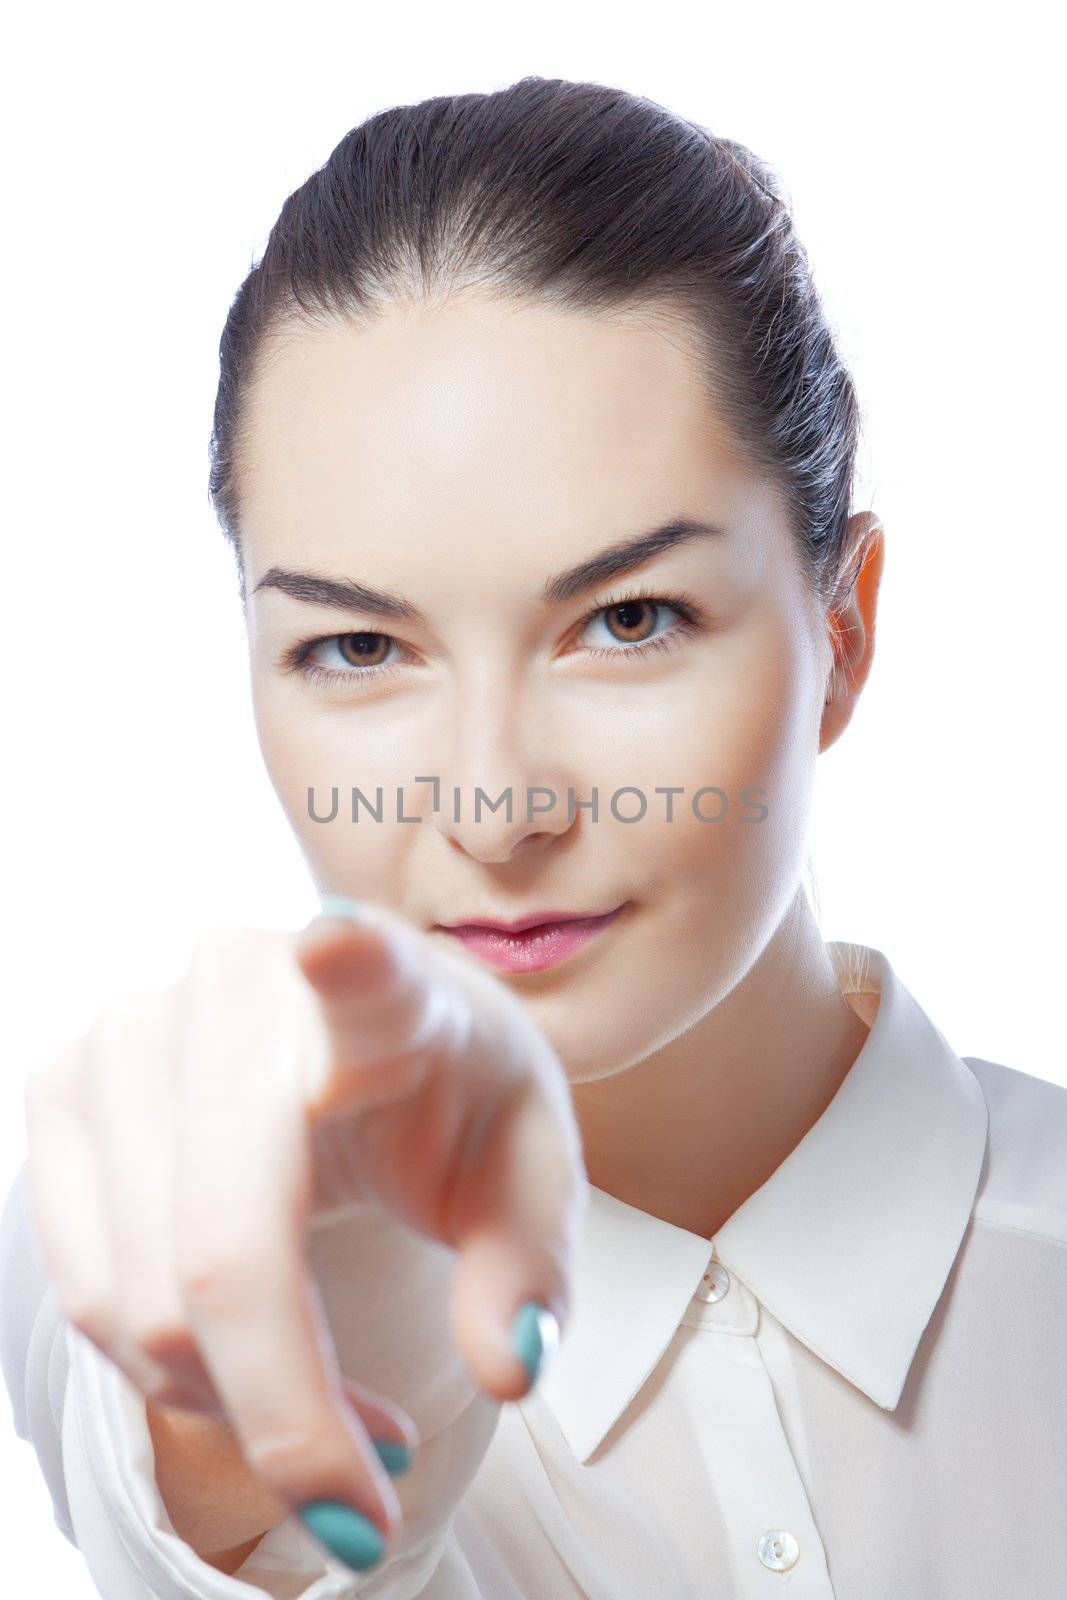 woman shows finger isolated on white background.